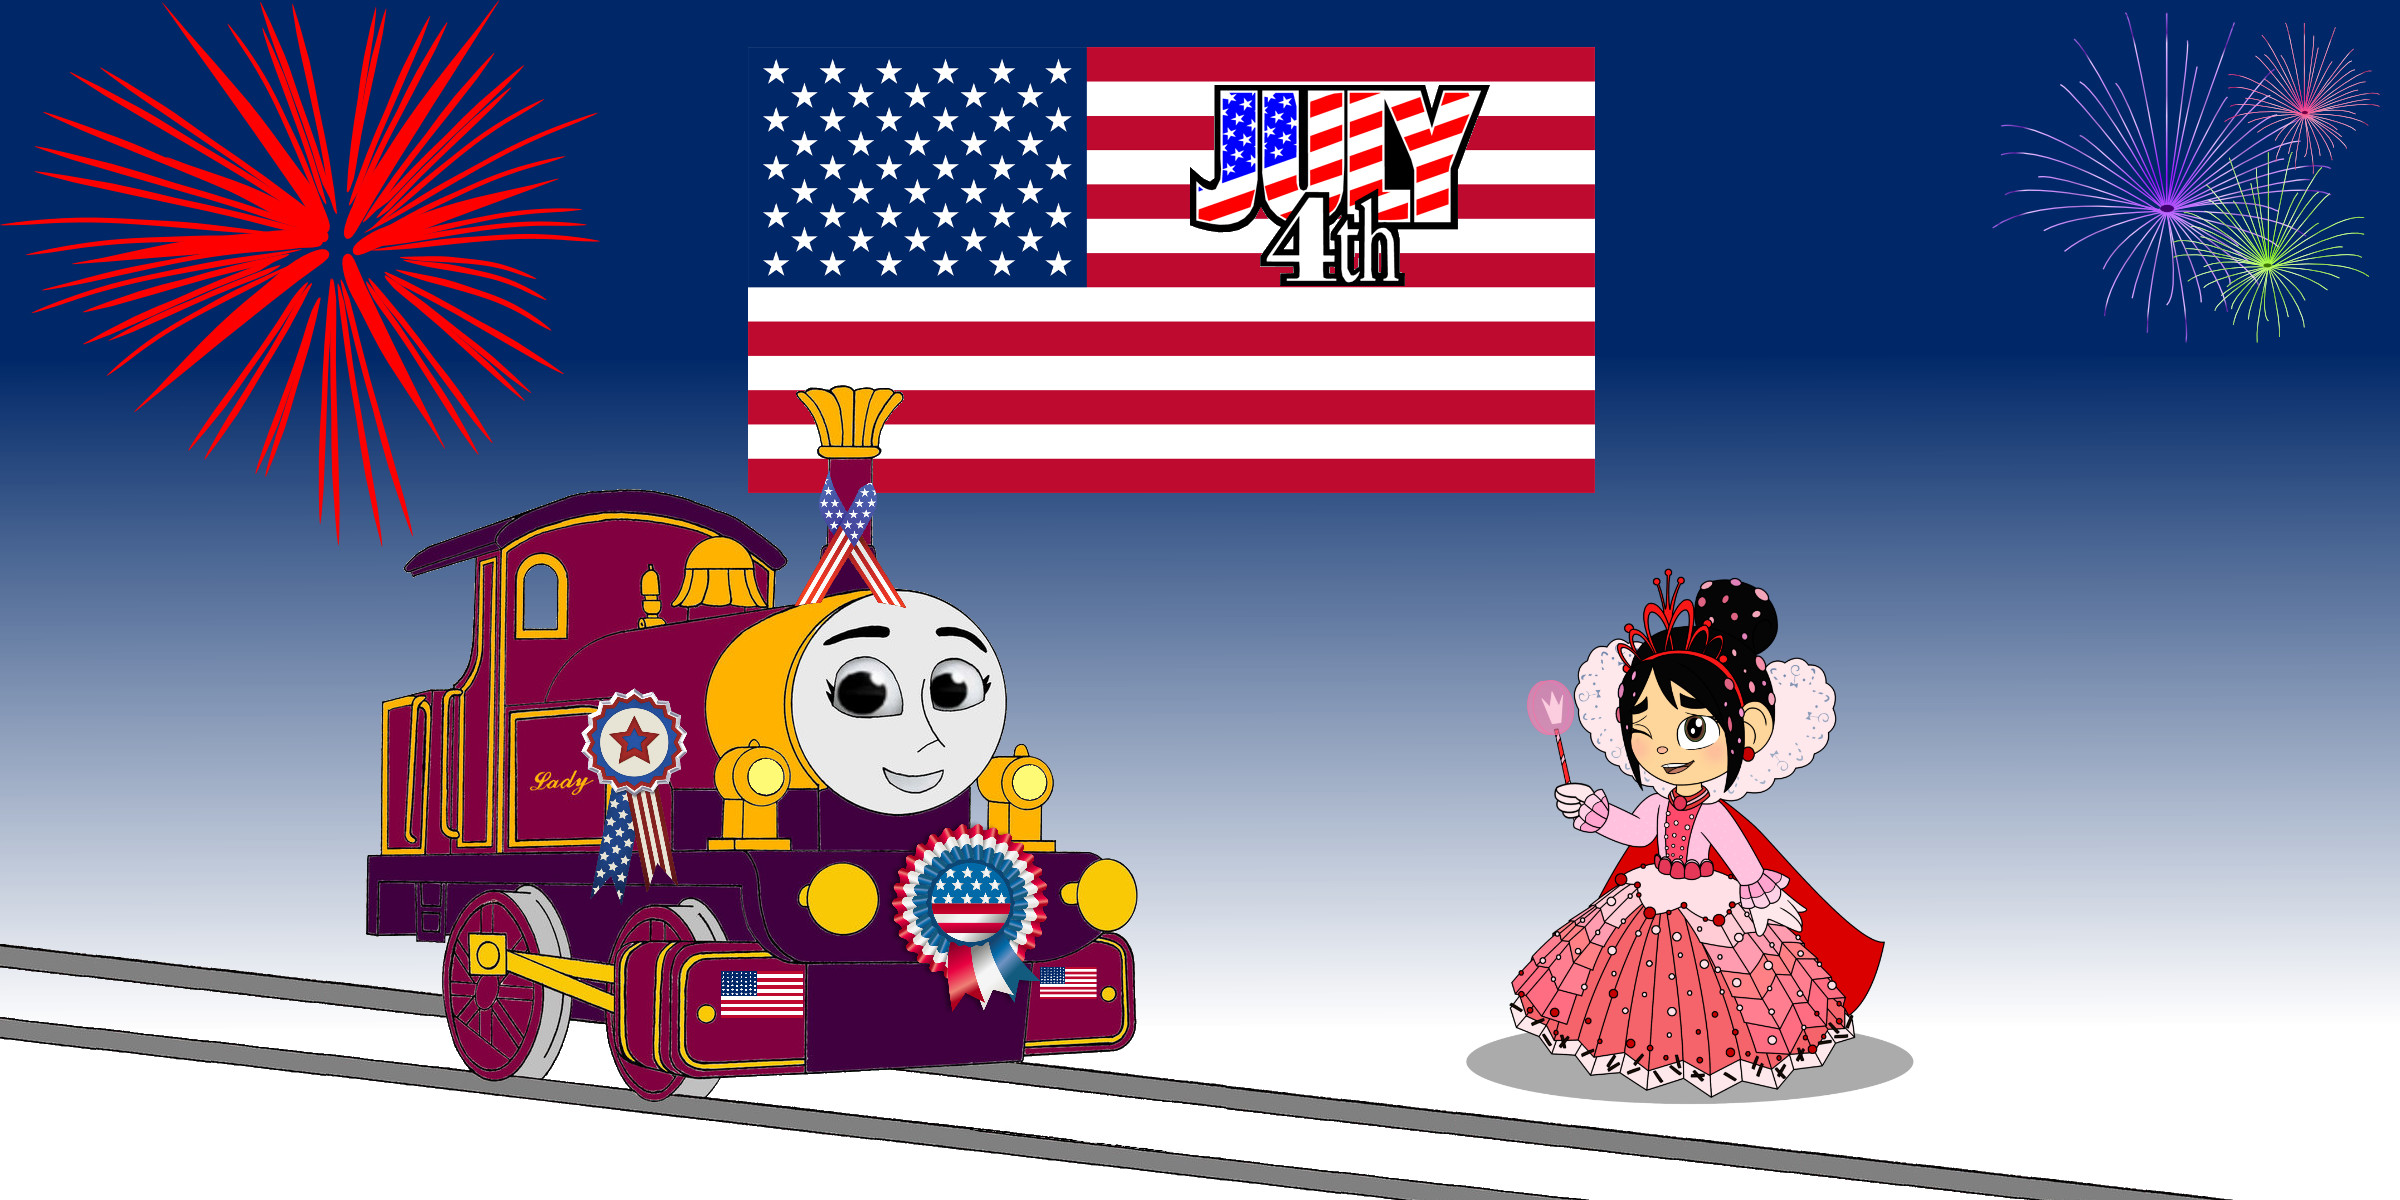 2400x1200 Tomy Thomas And Friends images Lady & Vanellope celebrate the 4th of July HD  wallpaper and background photos